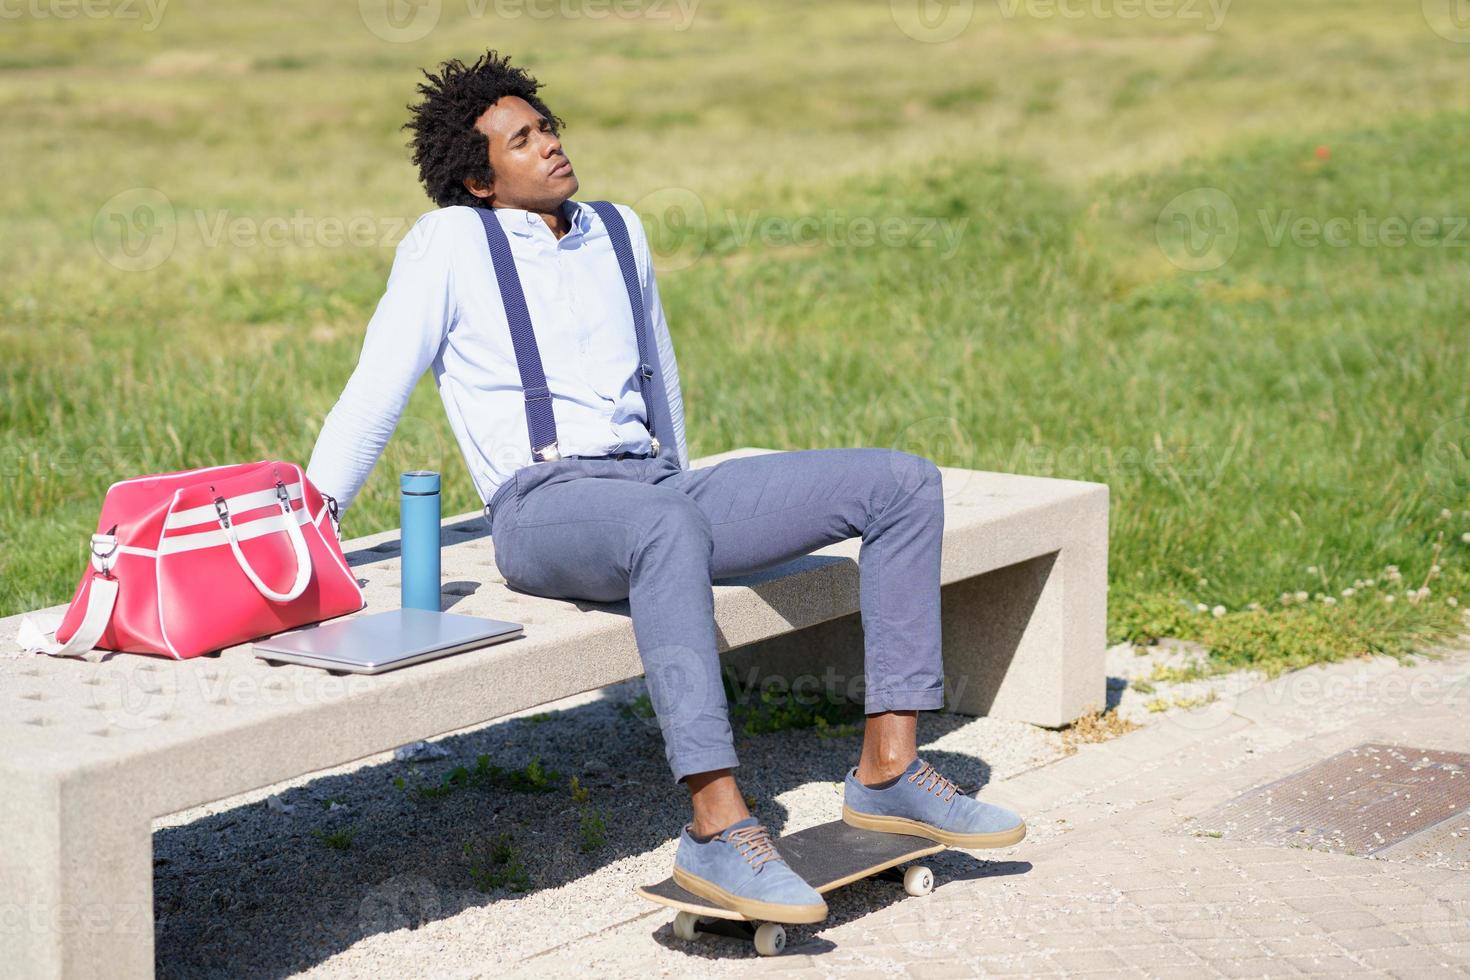 Black man with afro hair taking a coffee break photo